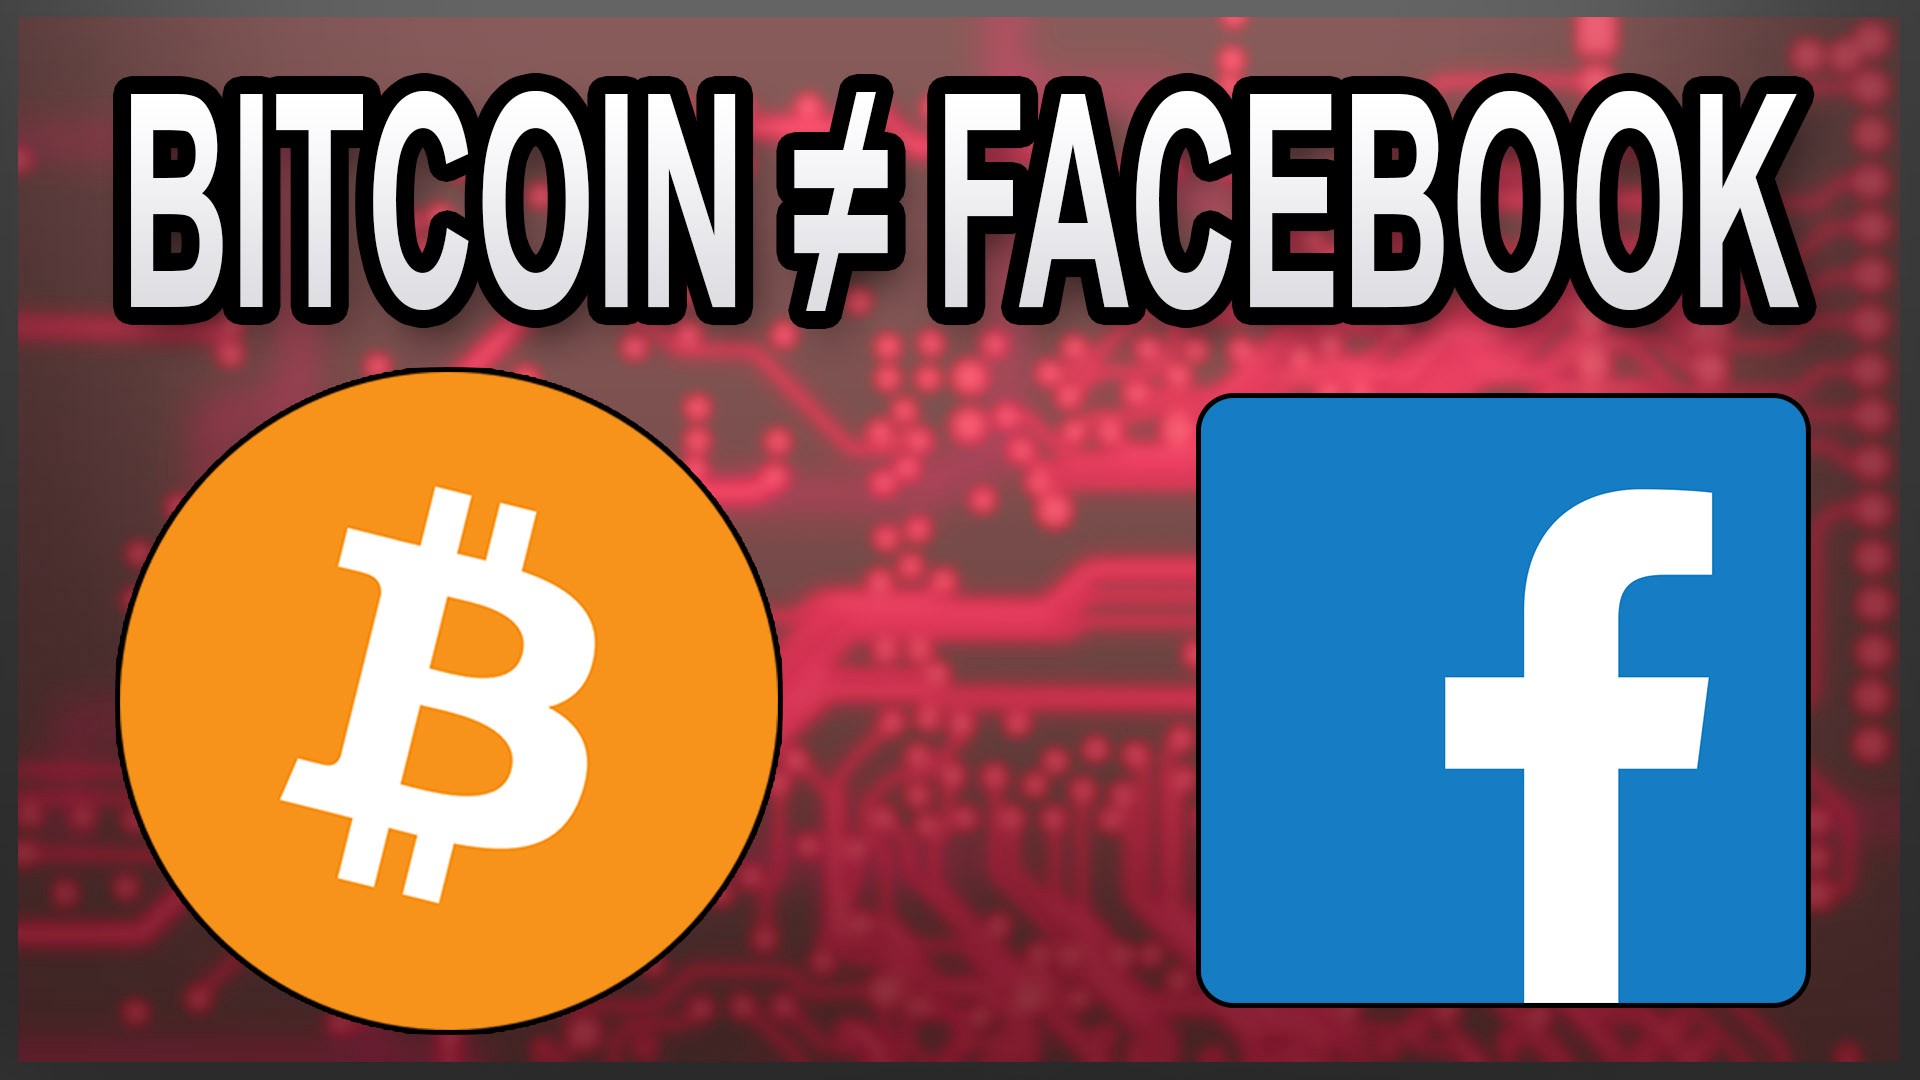 How About Paying For An App With A Facebook Coin?